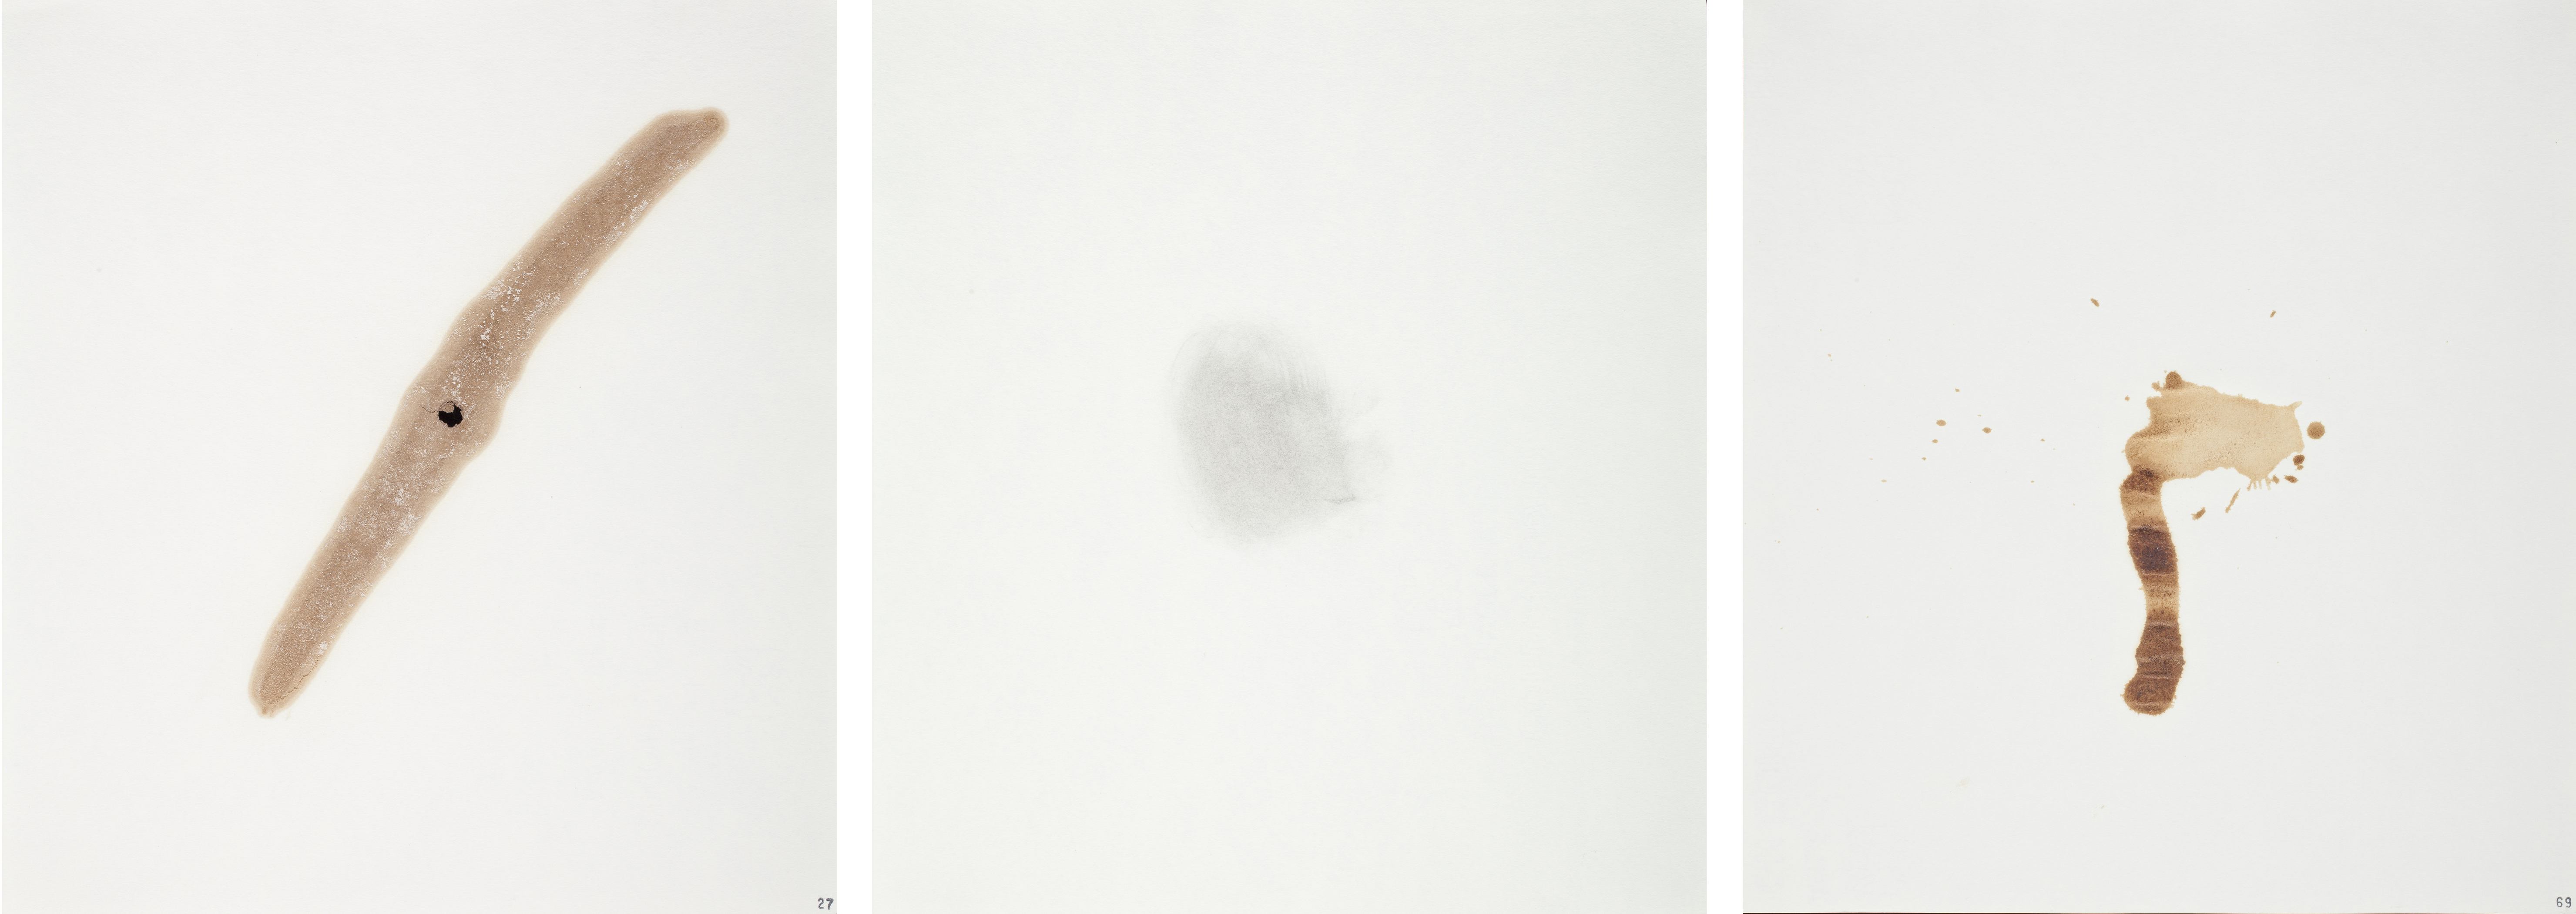 From left: Edward Ruscha, Sulfuric Acid (Mallinckrodt) from Stains, 1969, Los Angeles County Museum of Art, gift of JP Morgan Chase, © Edward J. Ruscha IV, photo © Museum Associates/LACMA; Edward Ruscha, Gunpowder (DuPont superfine) from Stains, 1969, Los Angeles County Museum of Art, gift of JP Morgan Chase, © Edward J. Ruscha IV, photo © Museum Associates/LACMA; Edward Ruscha, Worcestershire Sauce (Lea & Perrins) from Stains, 1969, Los Angeles County Museum of Art, gift of JP Morgan Chase, © Edward J. Ruscha IV, photo © Museum Associates/LACMA